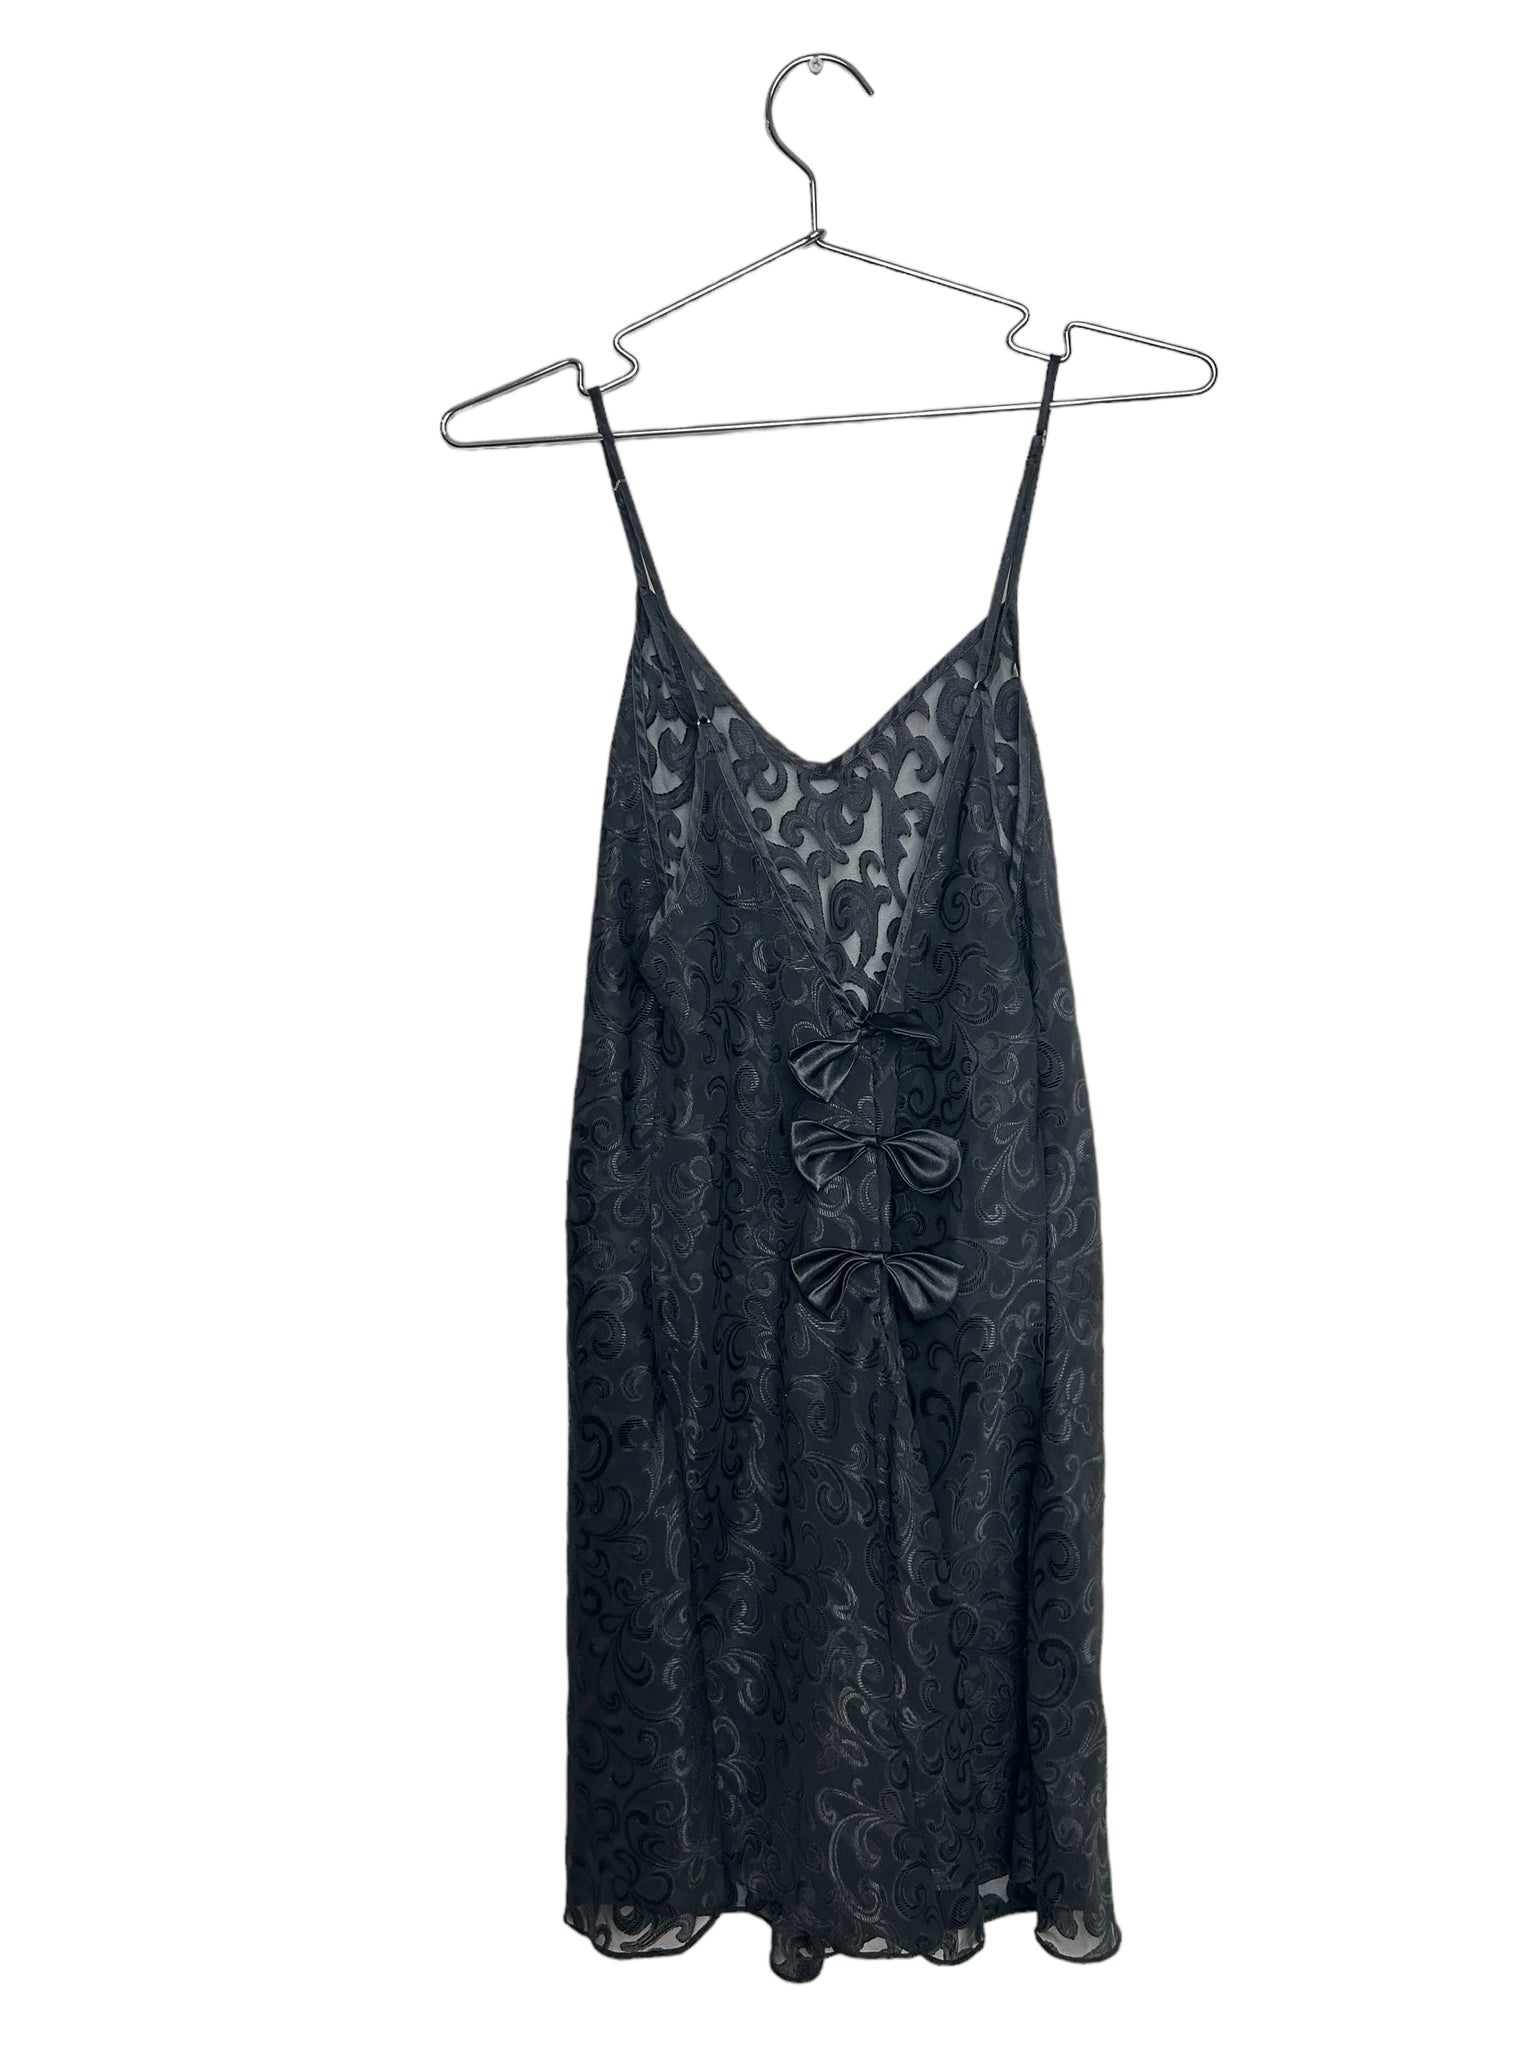 Embroidered Mesh Sheer Dress